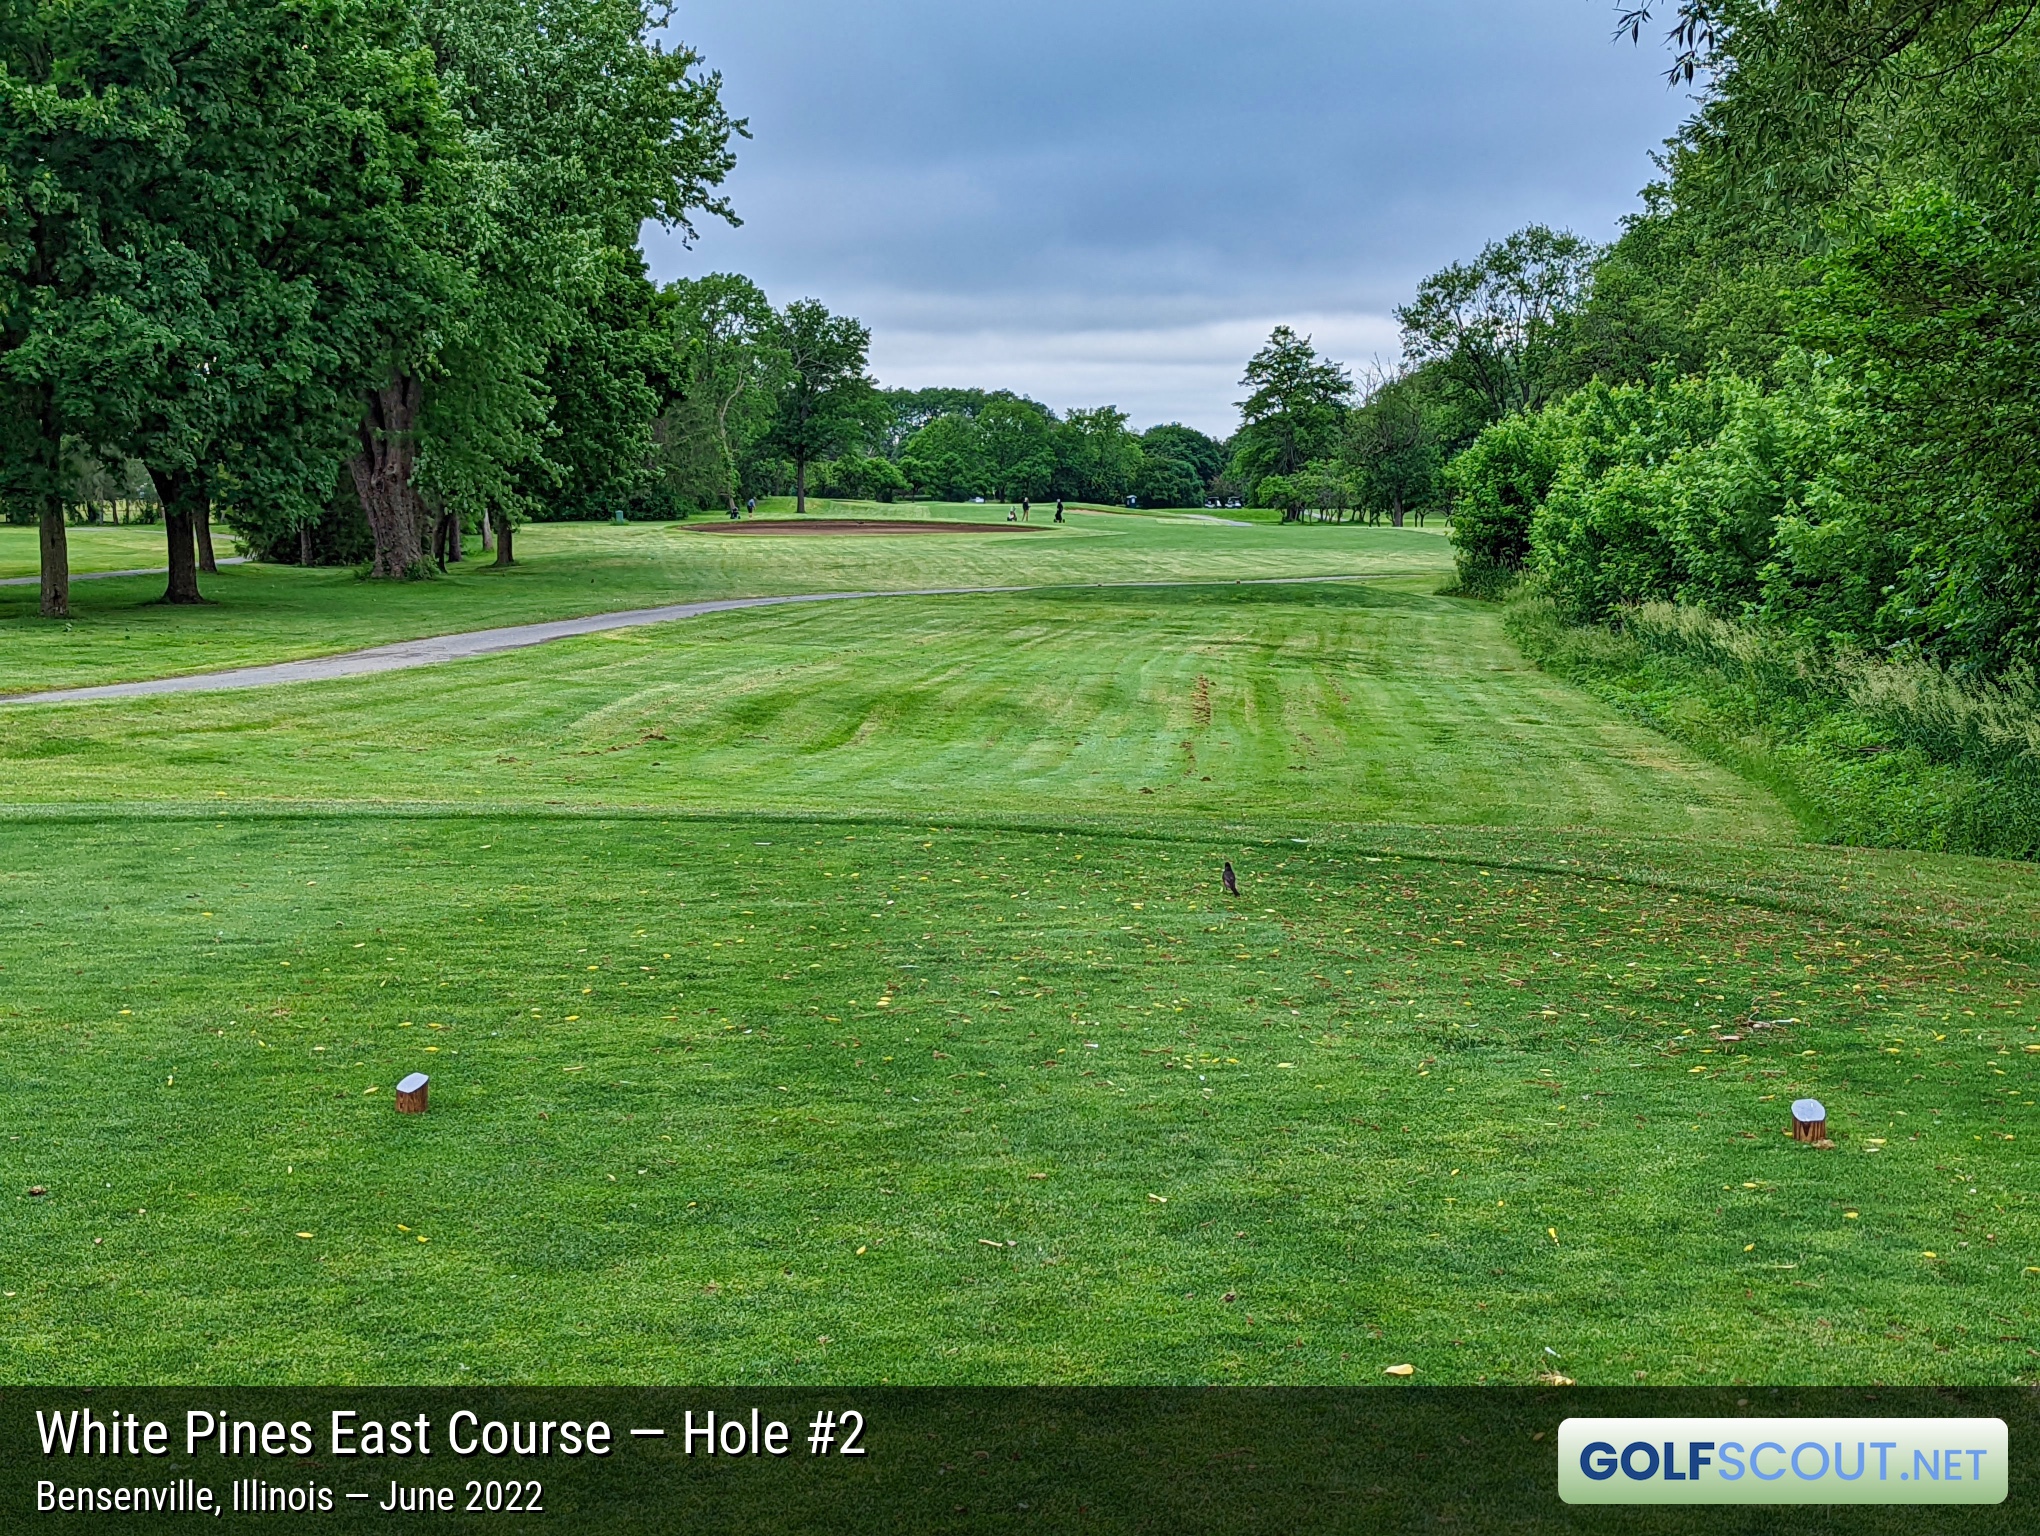 Photo of hole #2 at White Pines East Course in Bensenville, Illinois. 